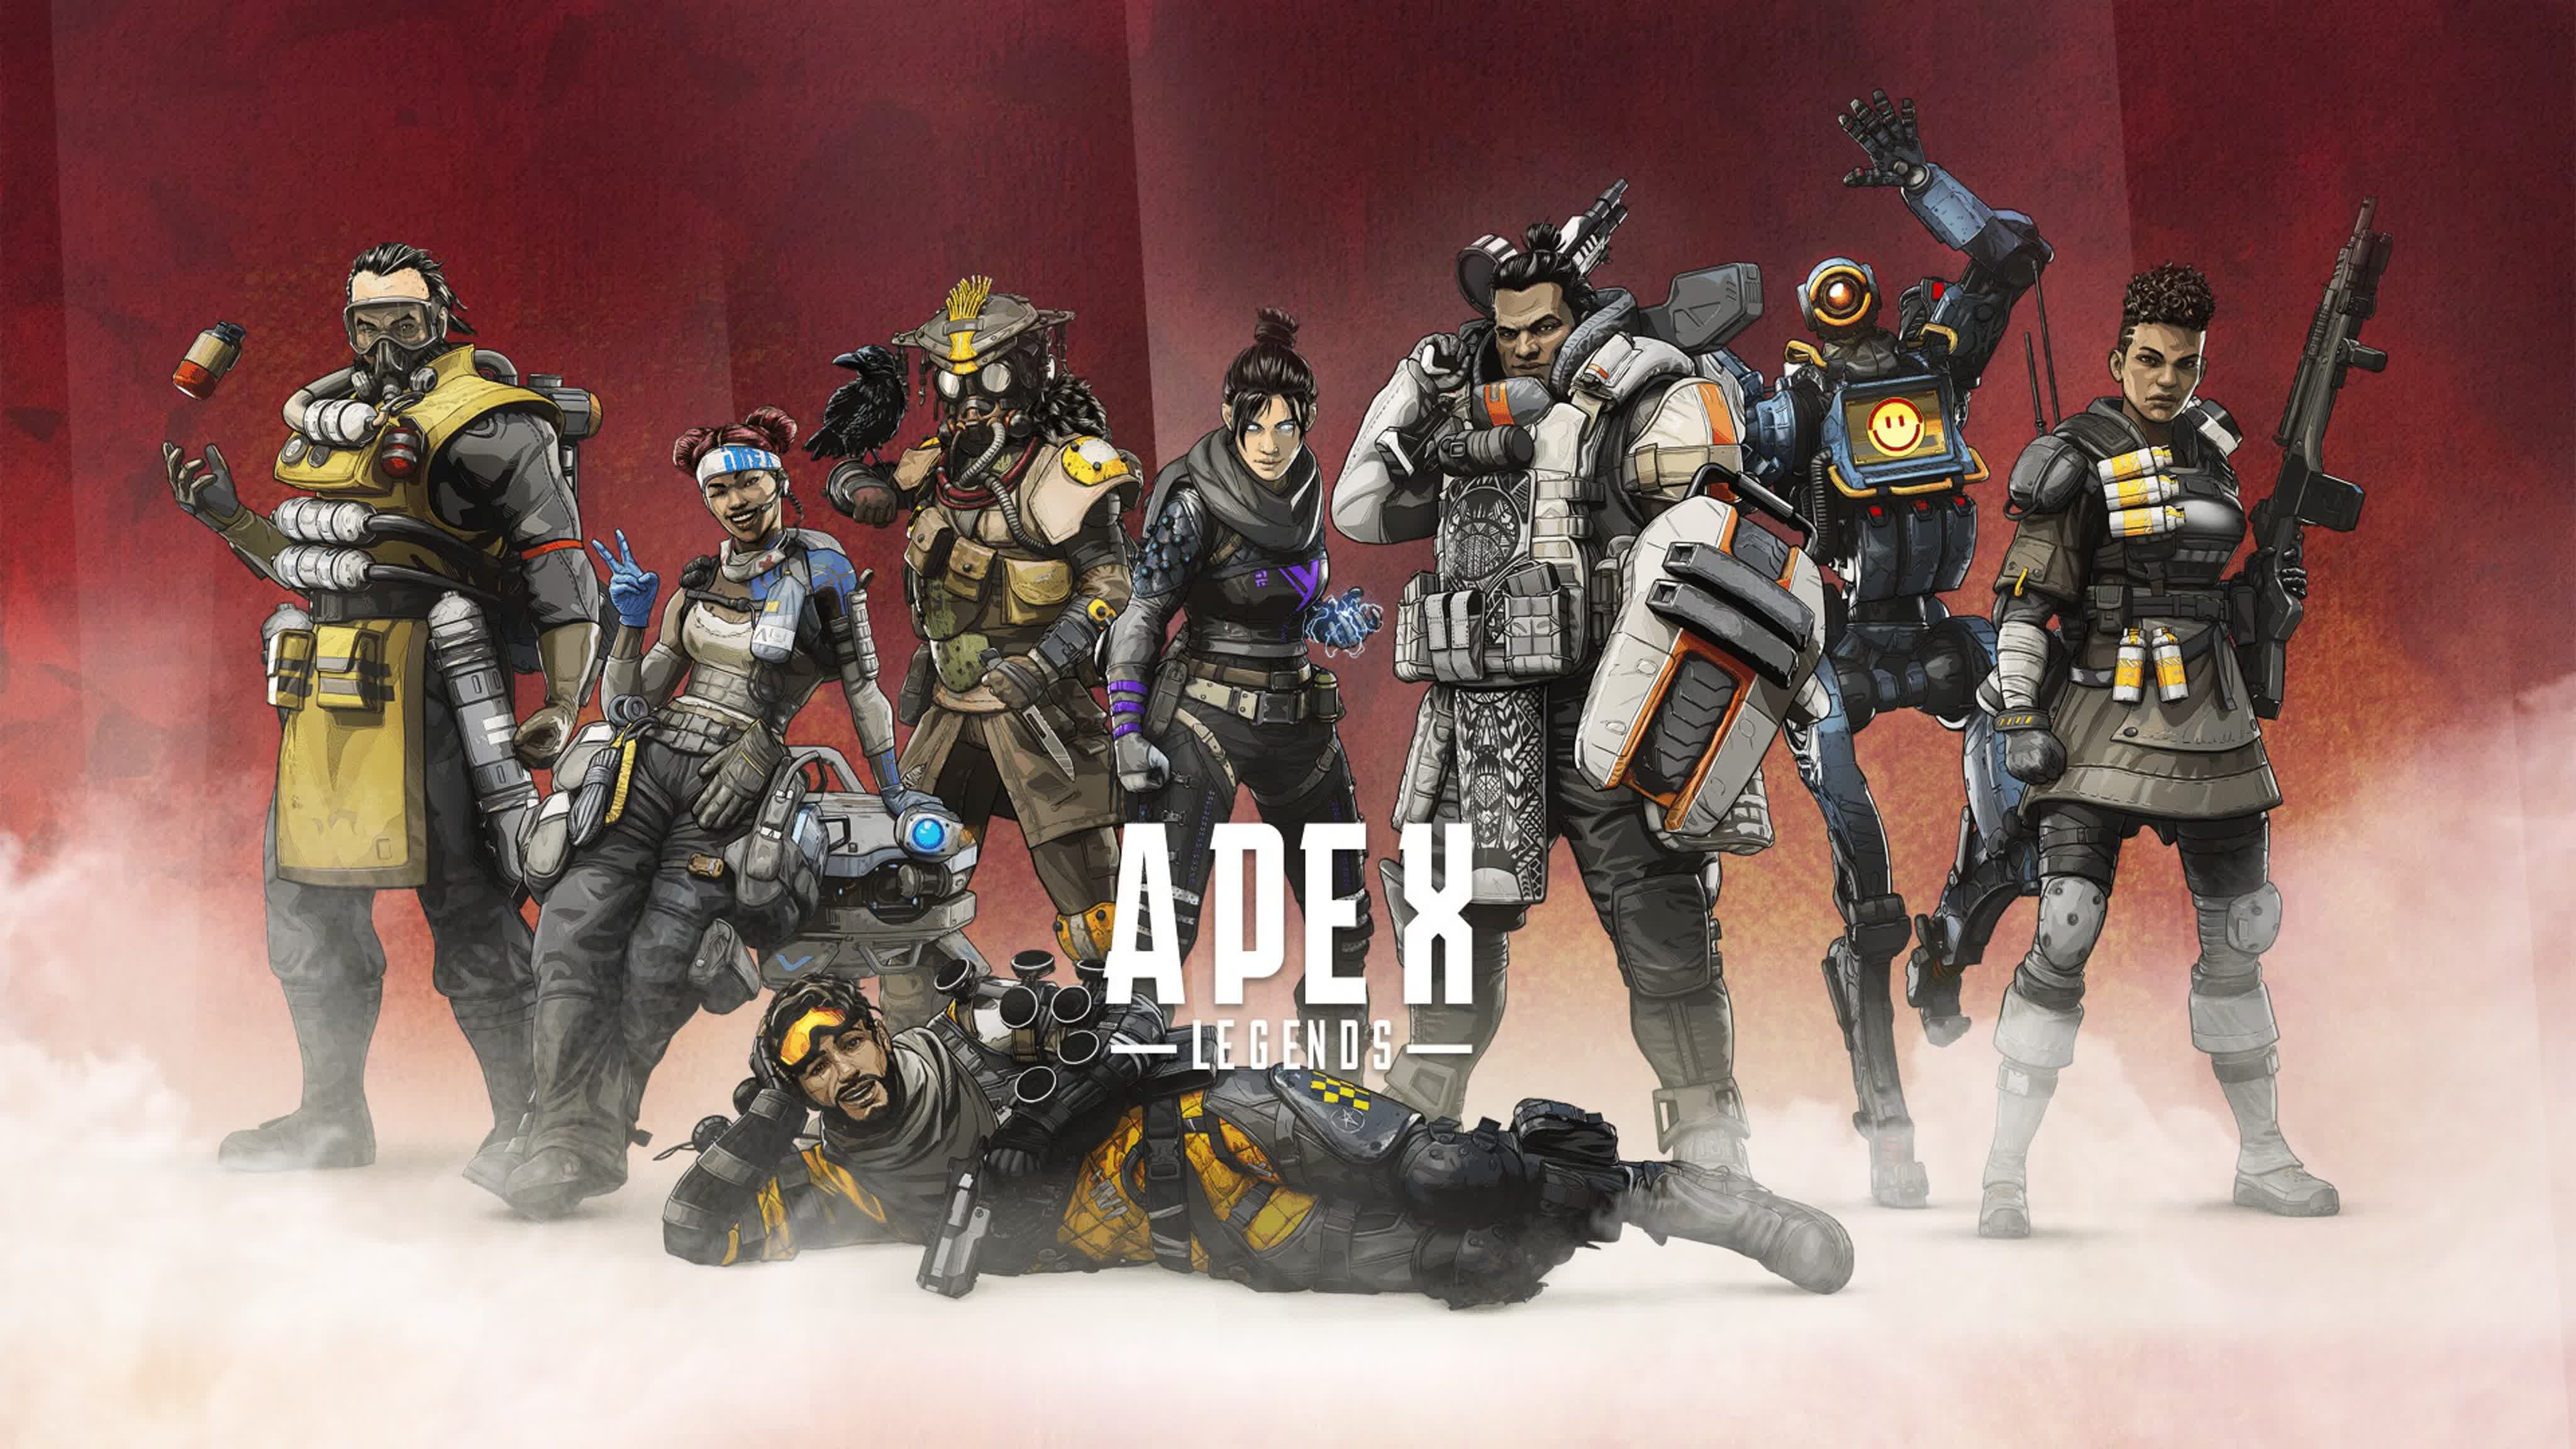 APEX LEGENDS - 2150 COINS VIRTUAL CURRENCY